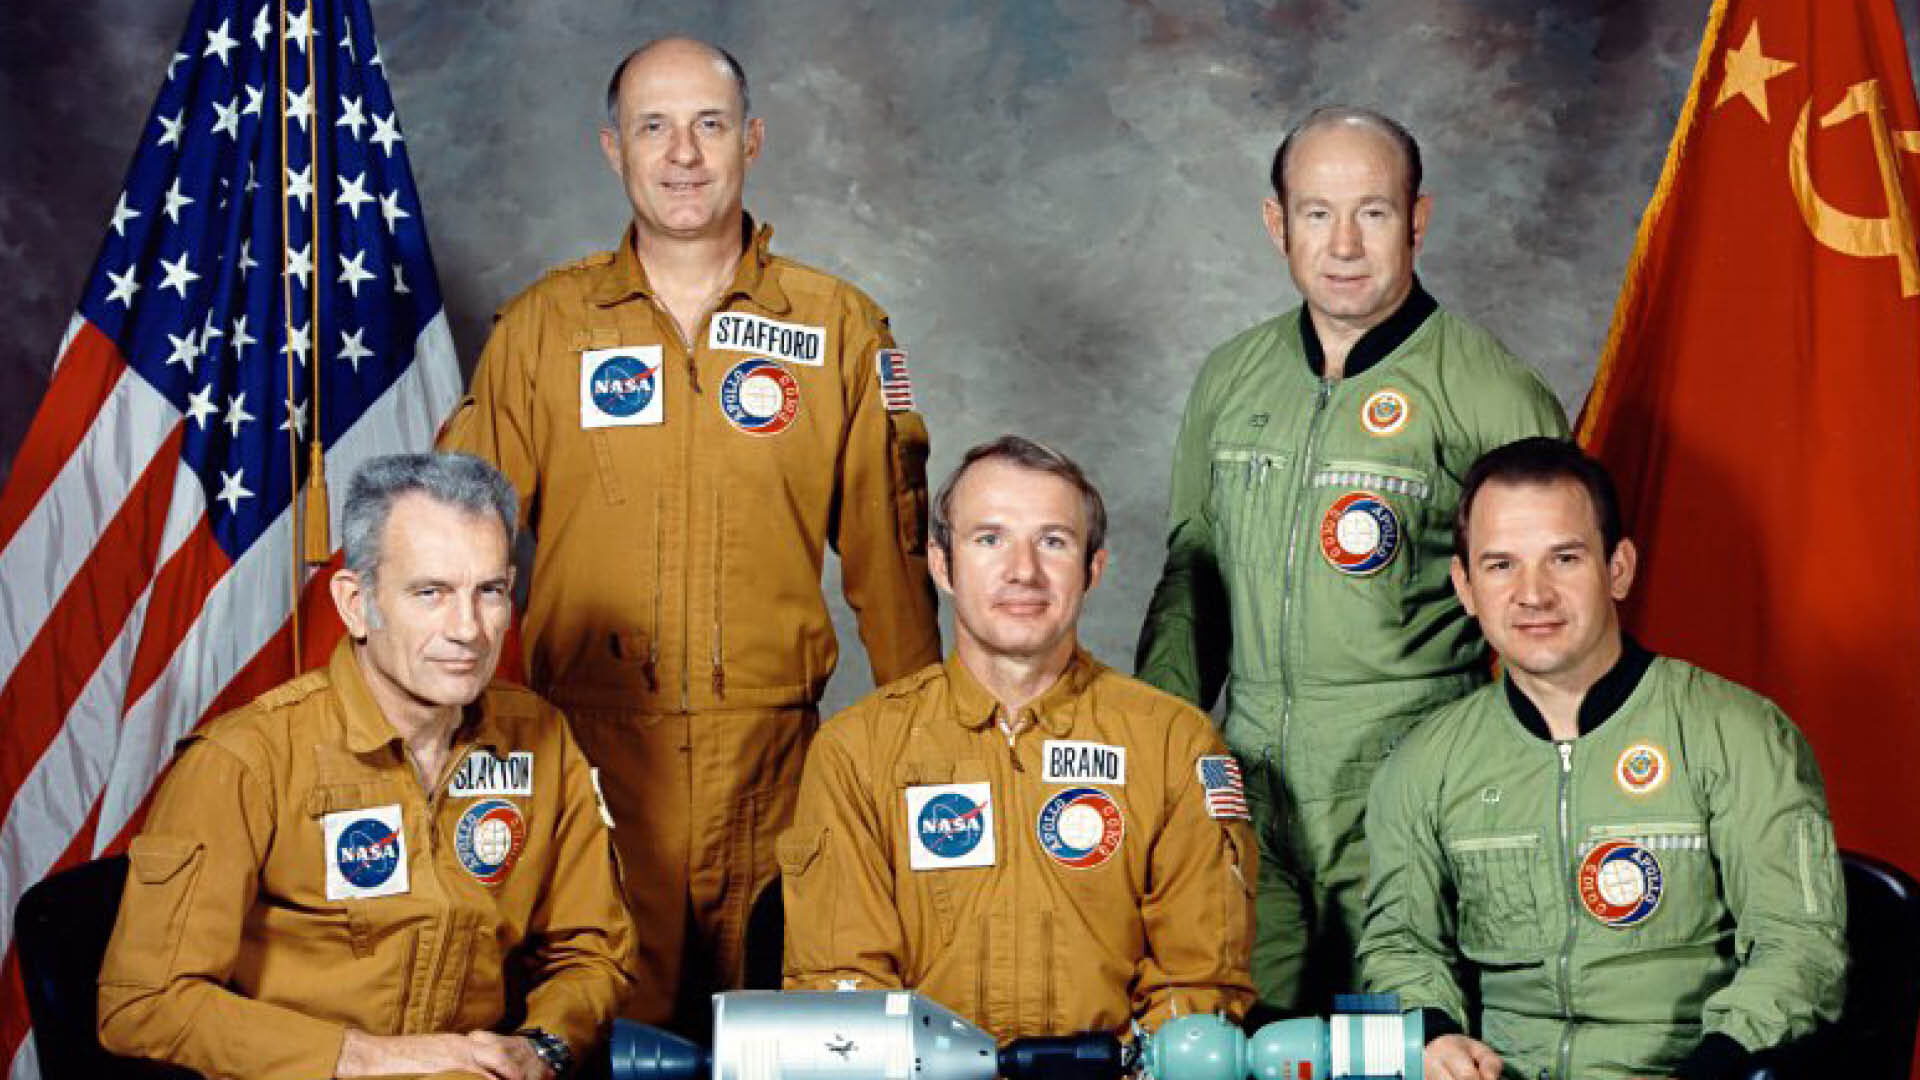 The American and Soviet crews of the Apollo-Soyuz Test Project.